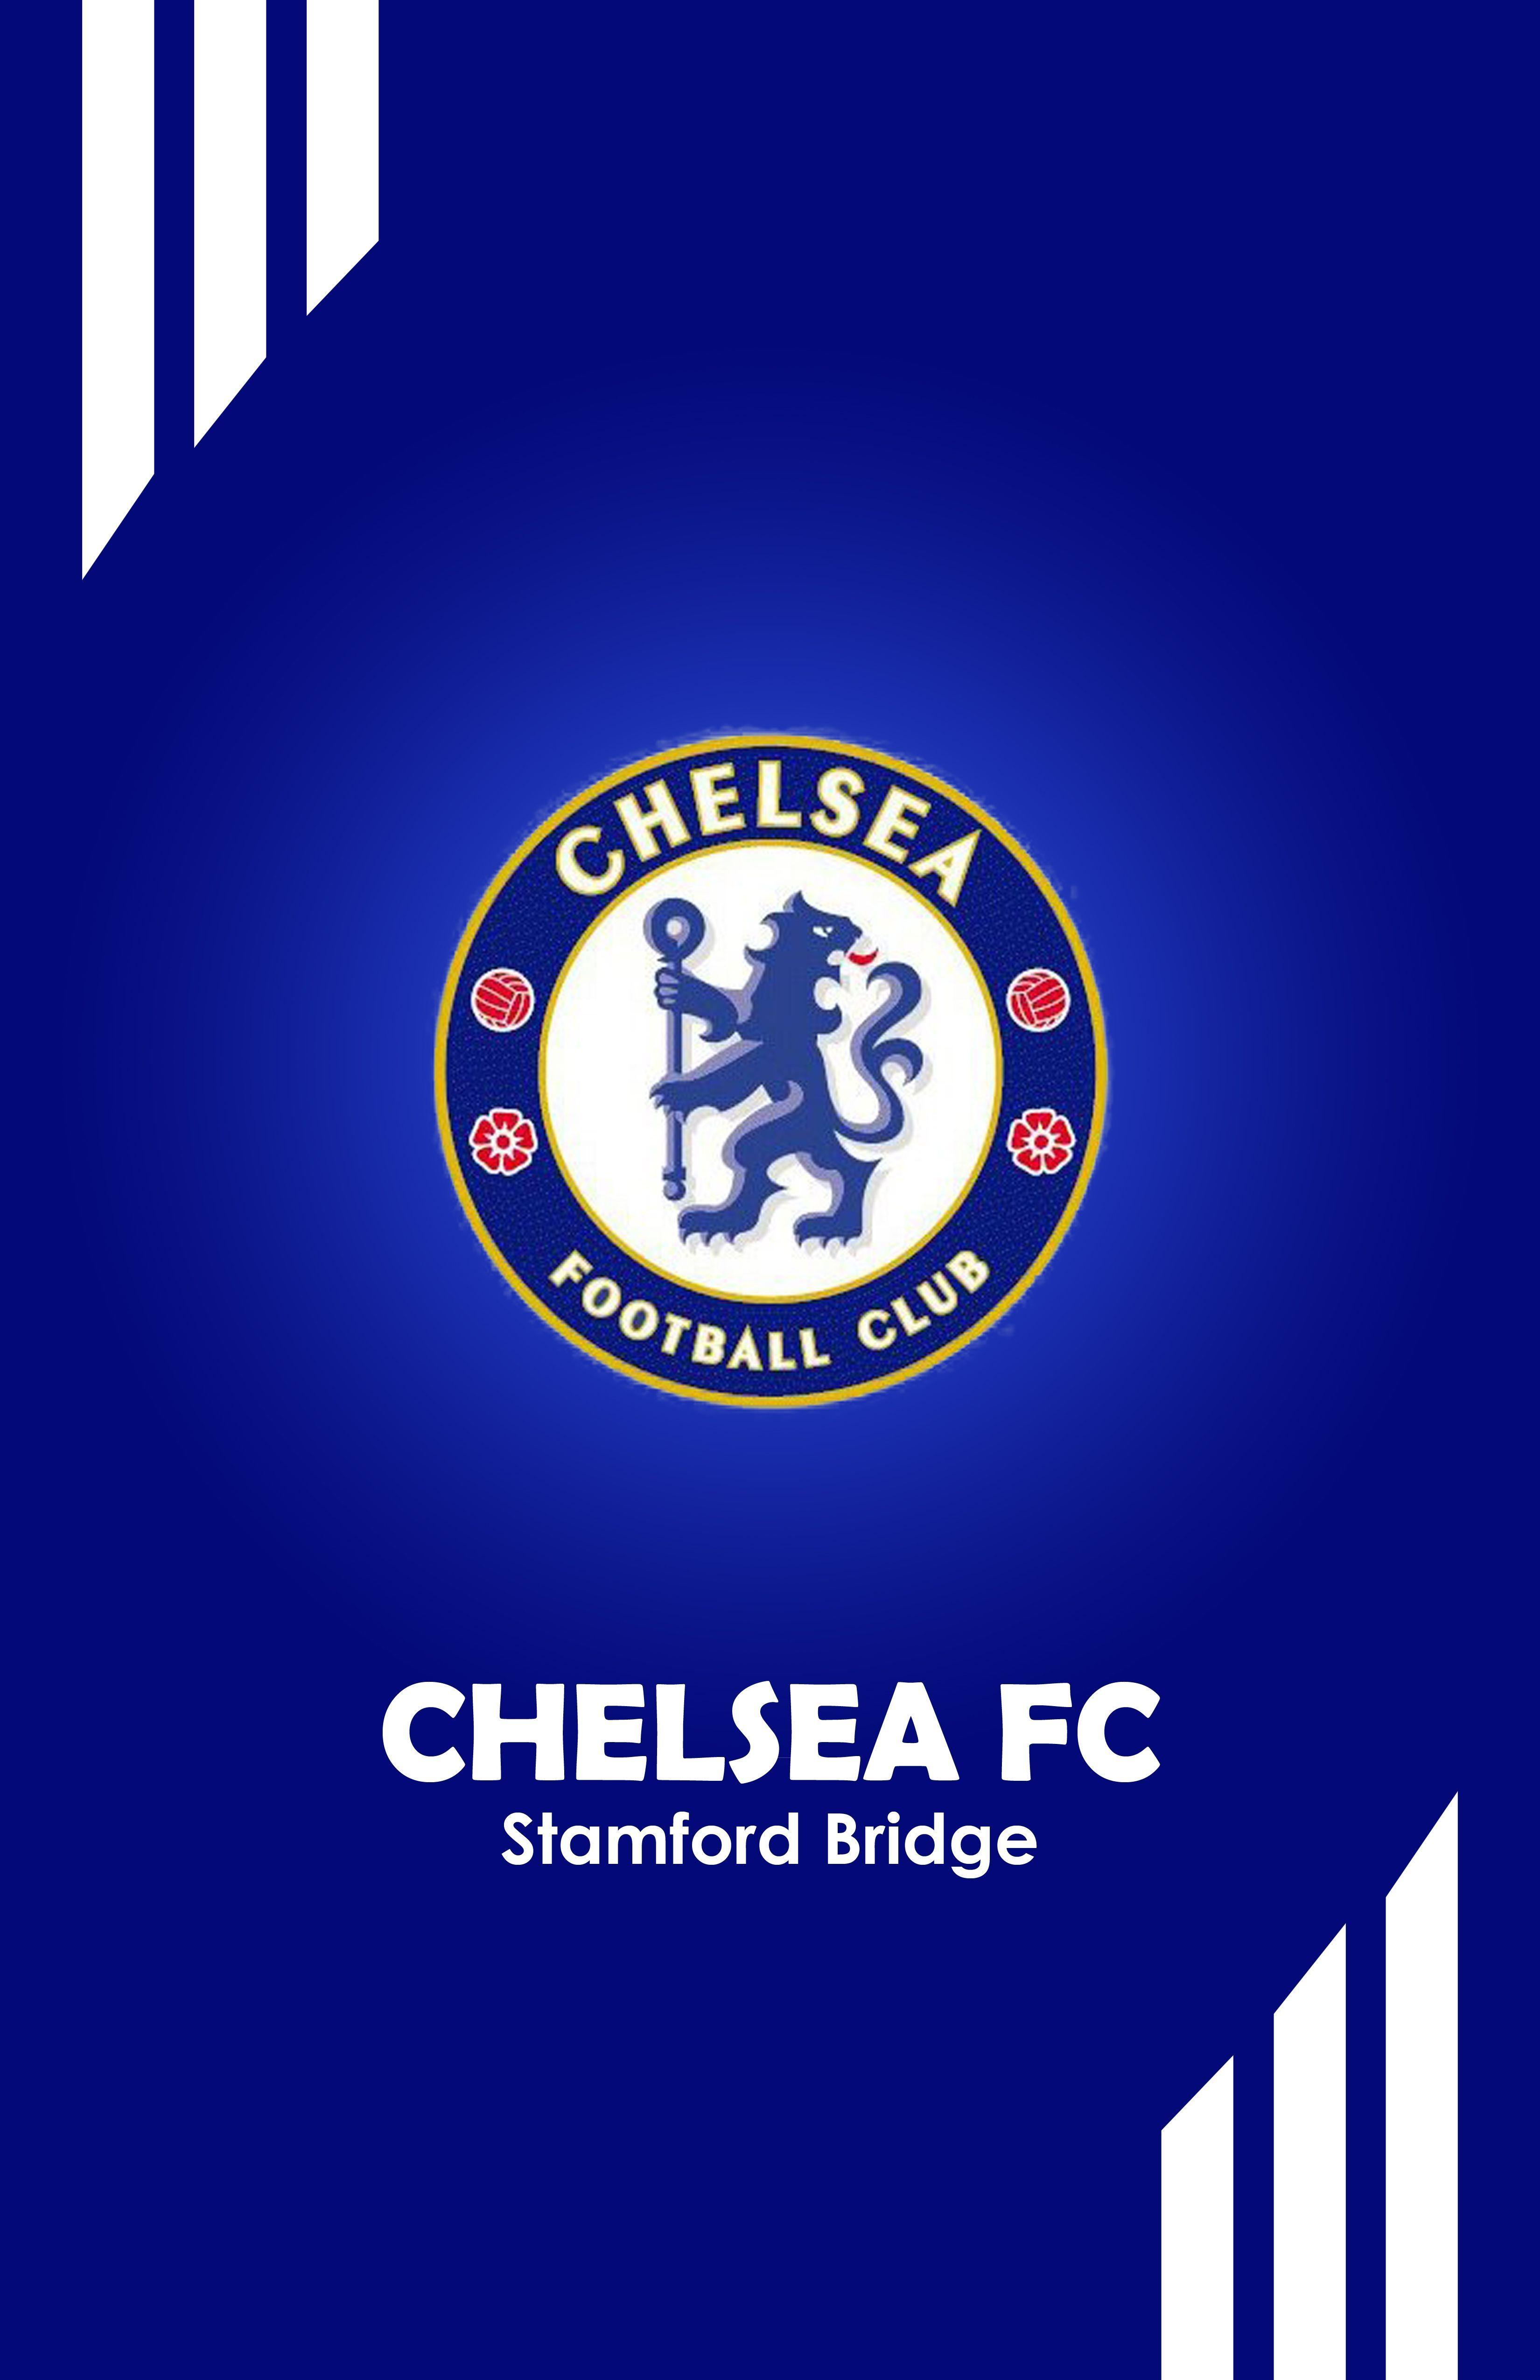 Pin on Wallpapers Premier League